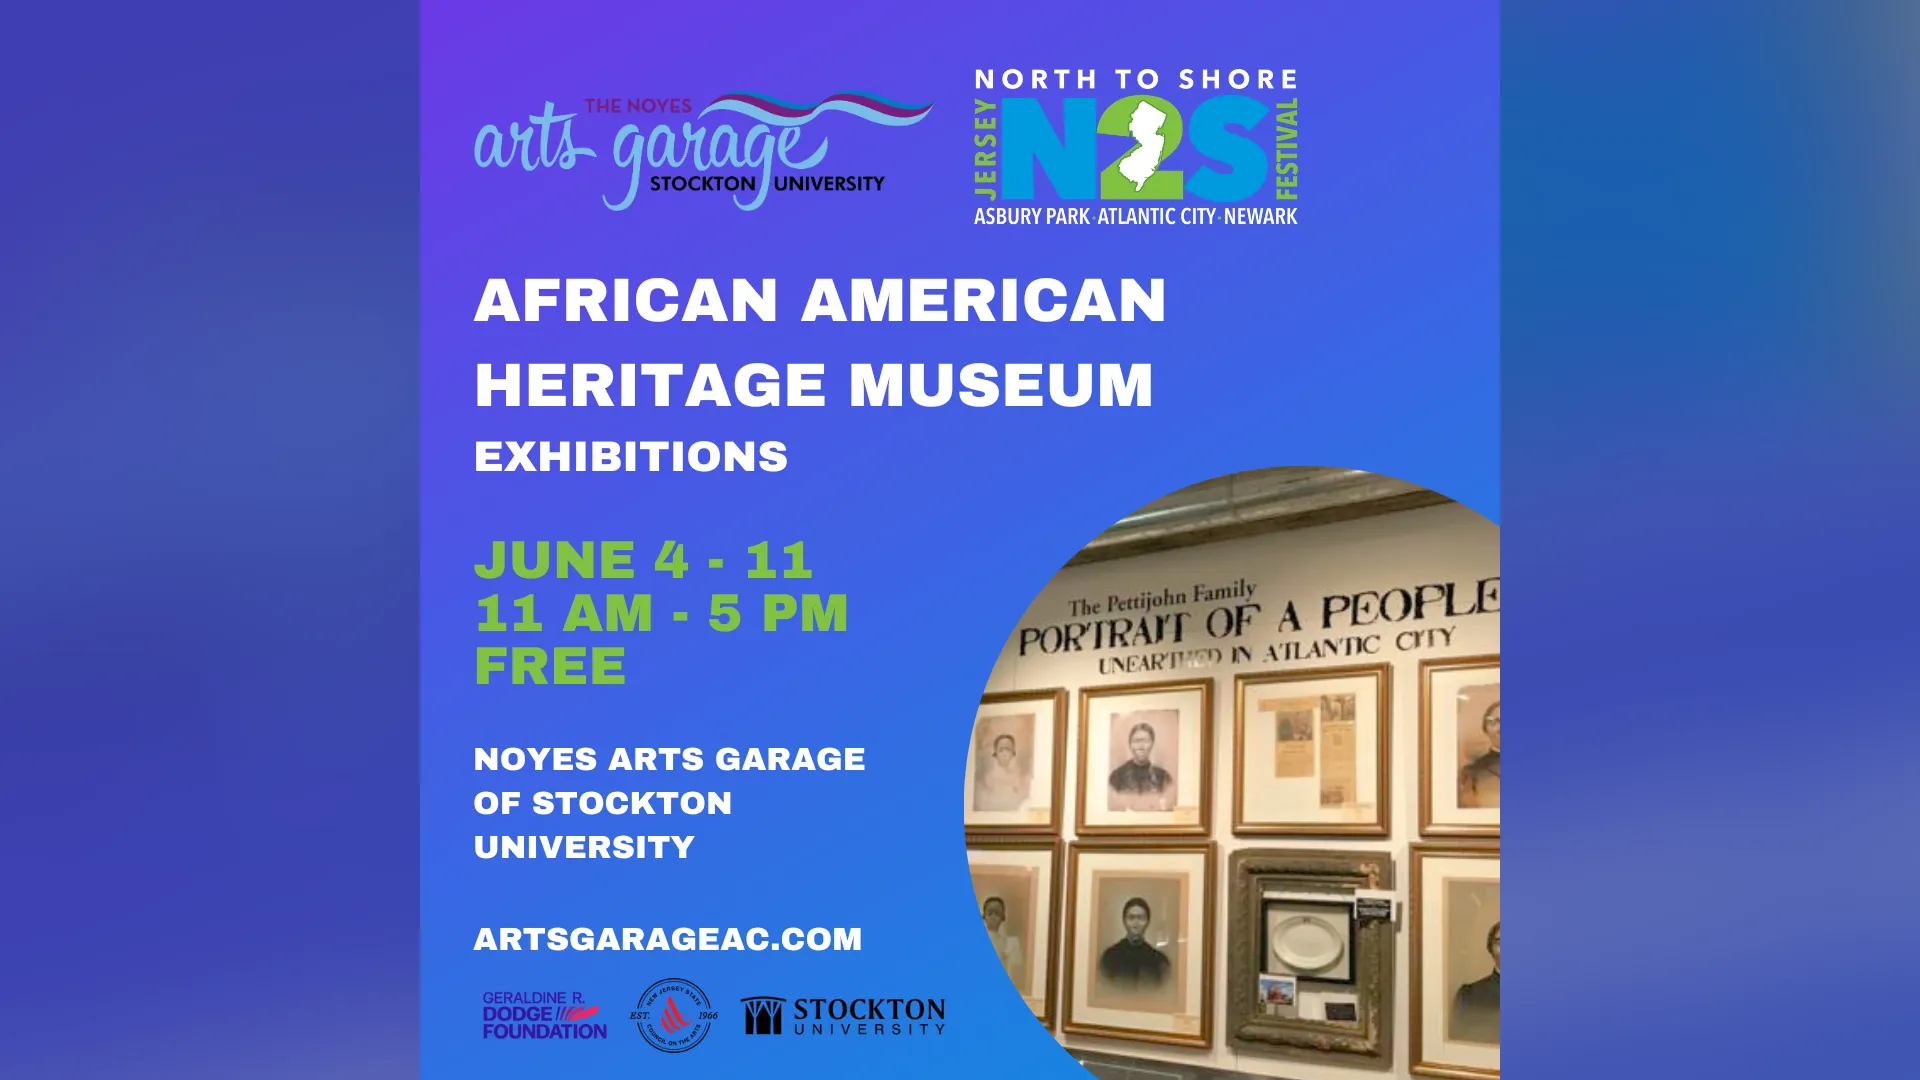 African American Heritage Museum exhibitions